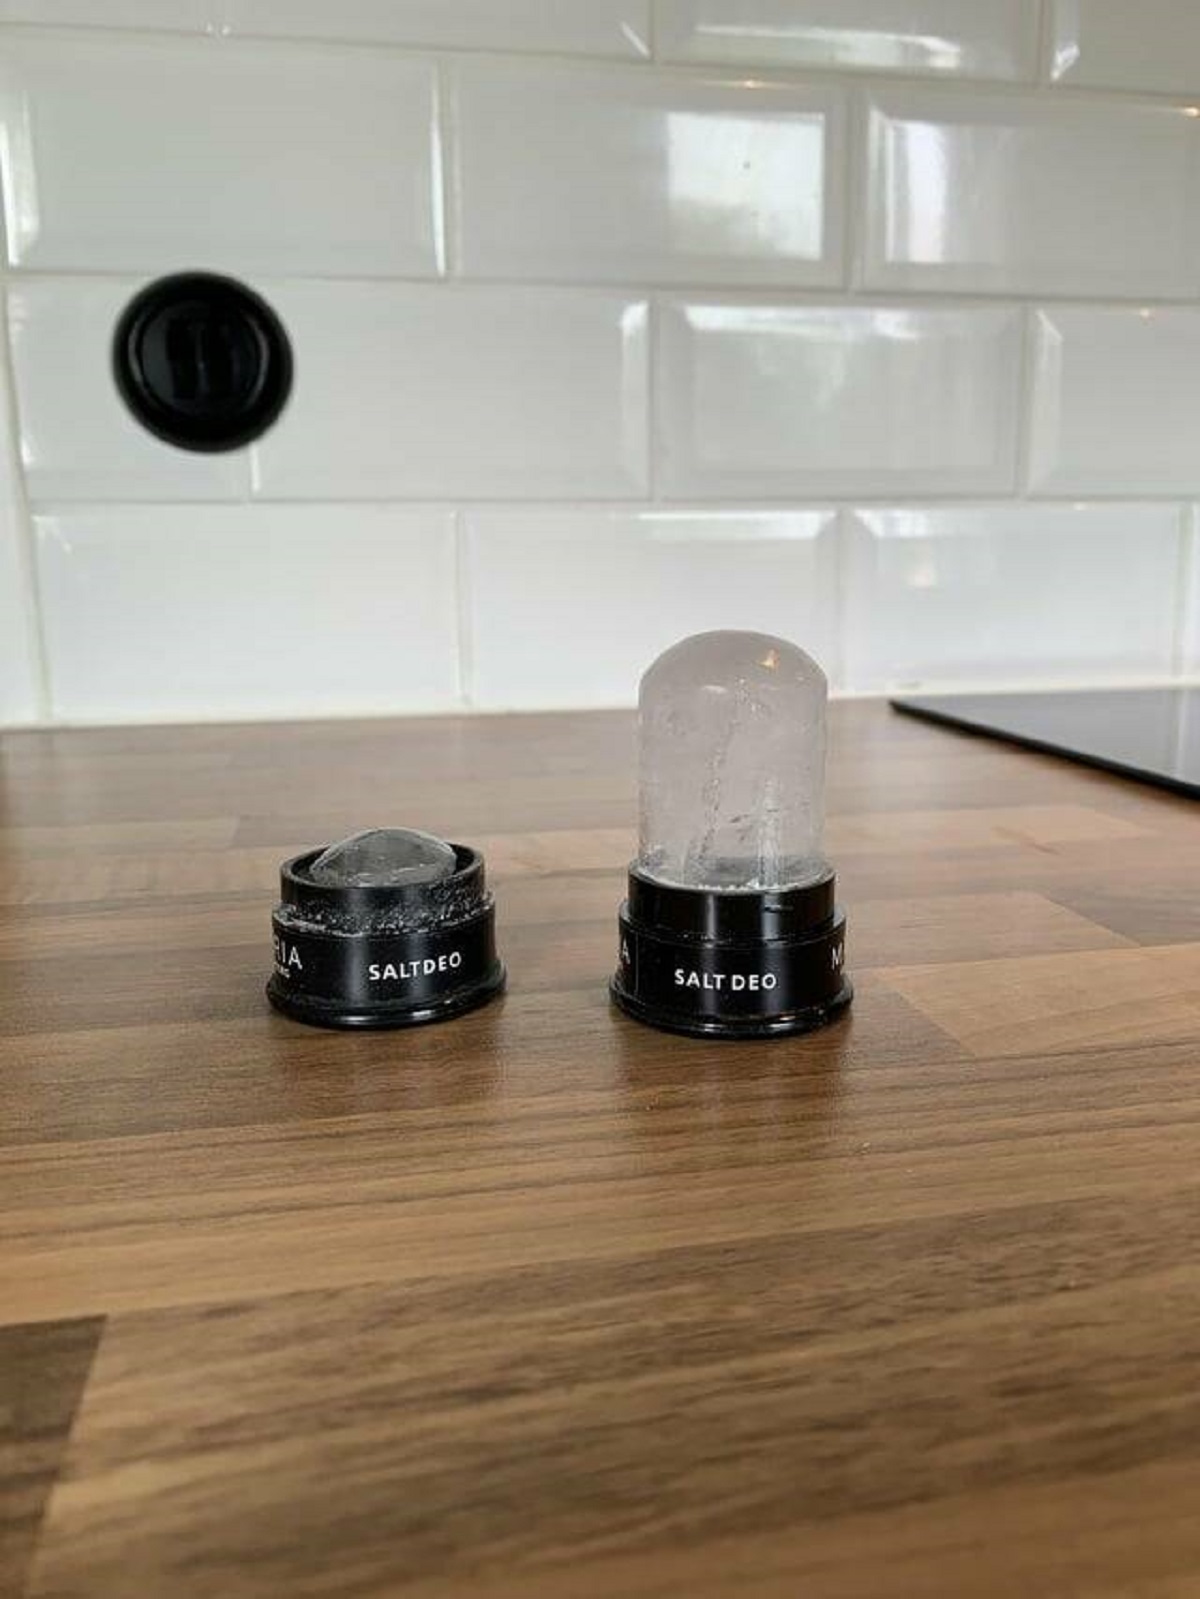 "My salt rock deodorant after five years of almost daily usage vs a new one."